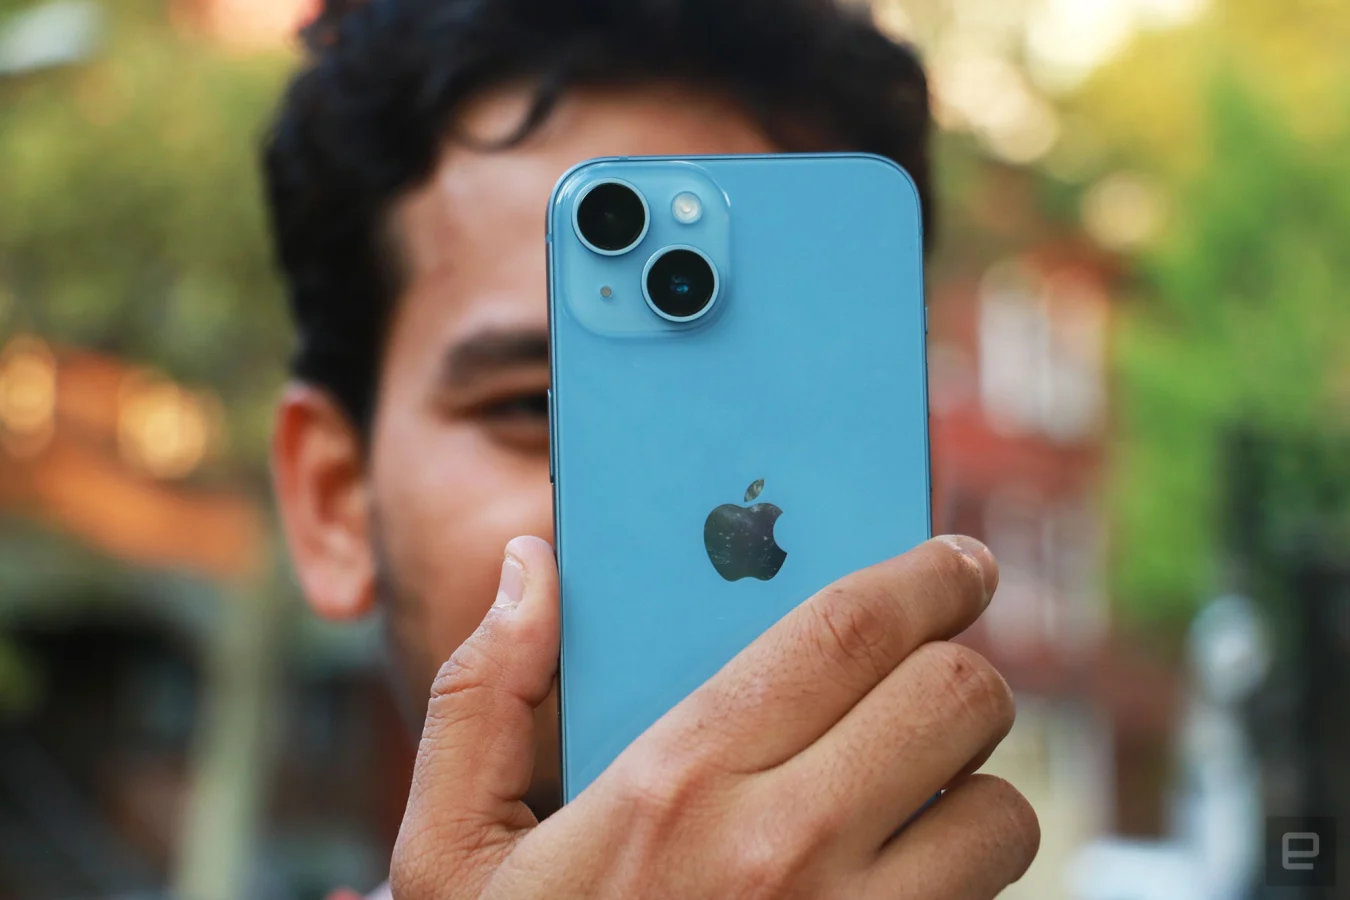 The iPhone 14 held up in mid-air with a man behind it, showing the dual rear cameras.